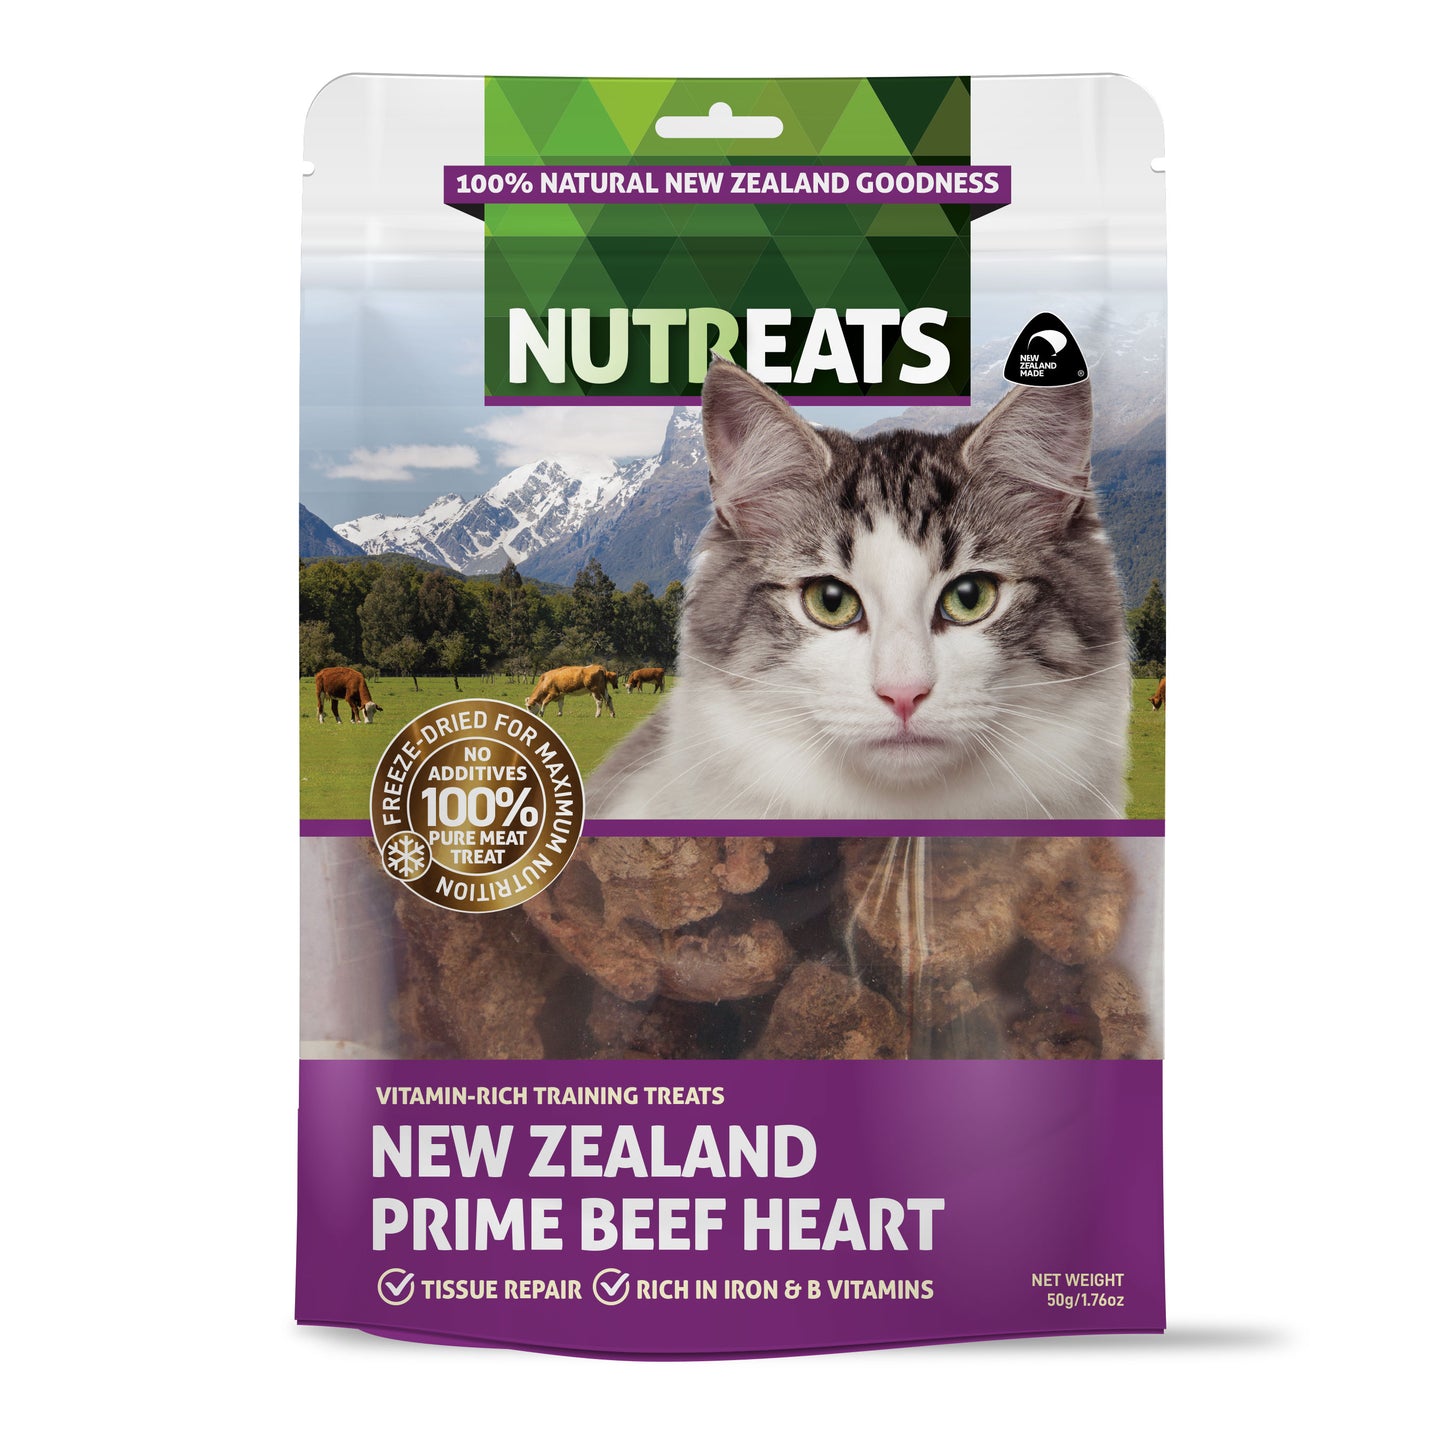 Nutreats New Zealand prime beef heart cat treats for cats - rich in iron and B vitamins supporting healthy natural tissue repai. 100% natural - pure meat treat. Freeze-dried for maximum nutritional value.